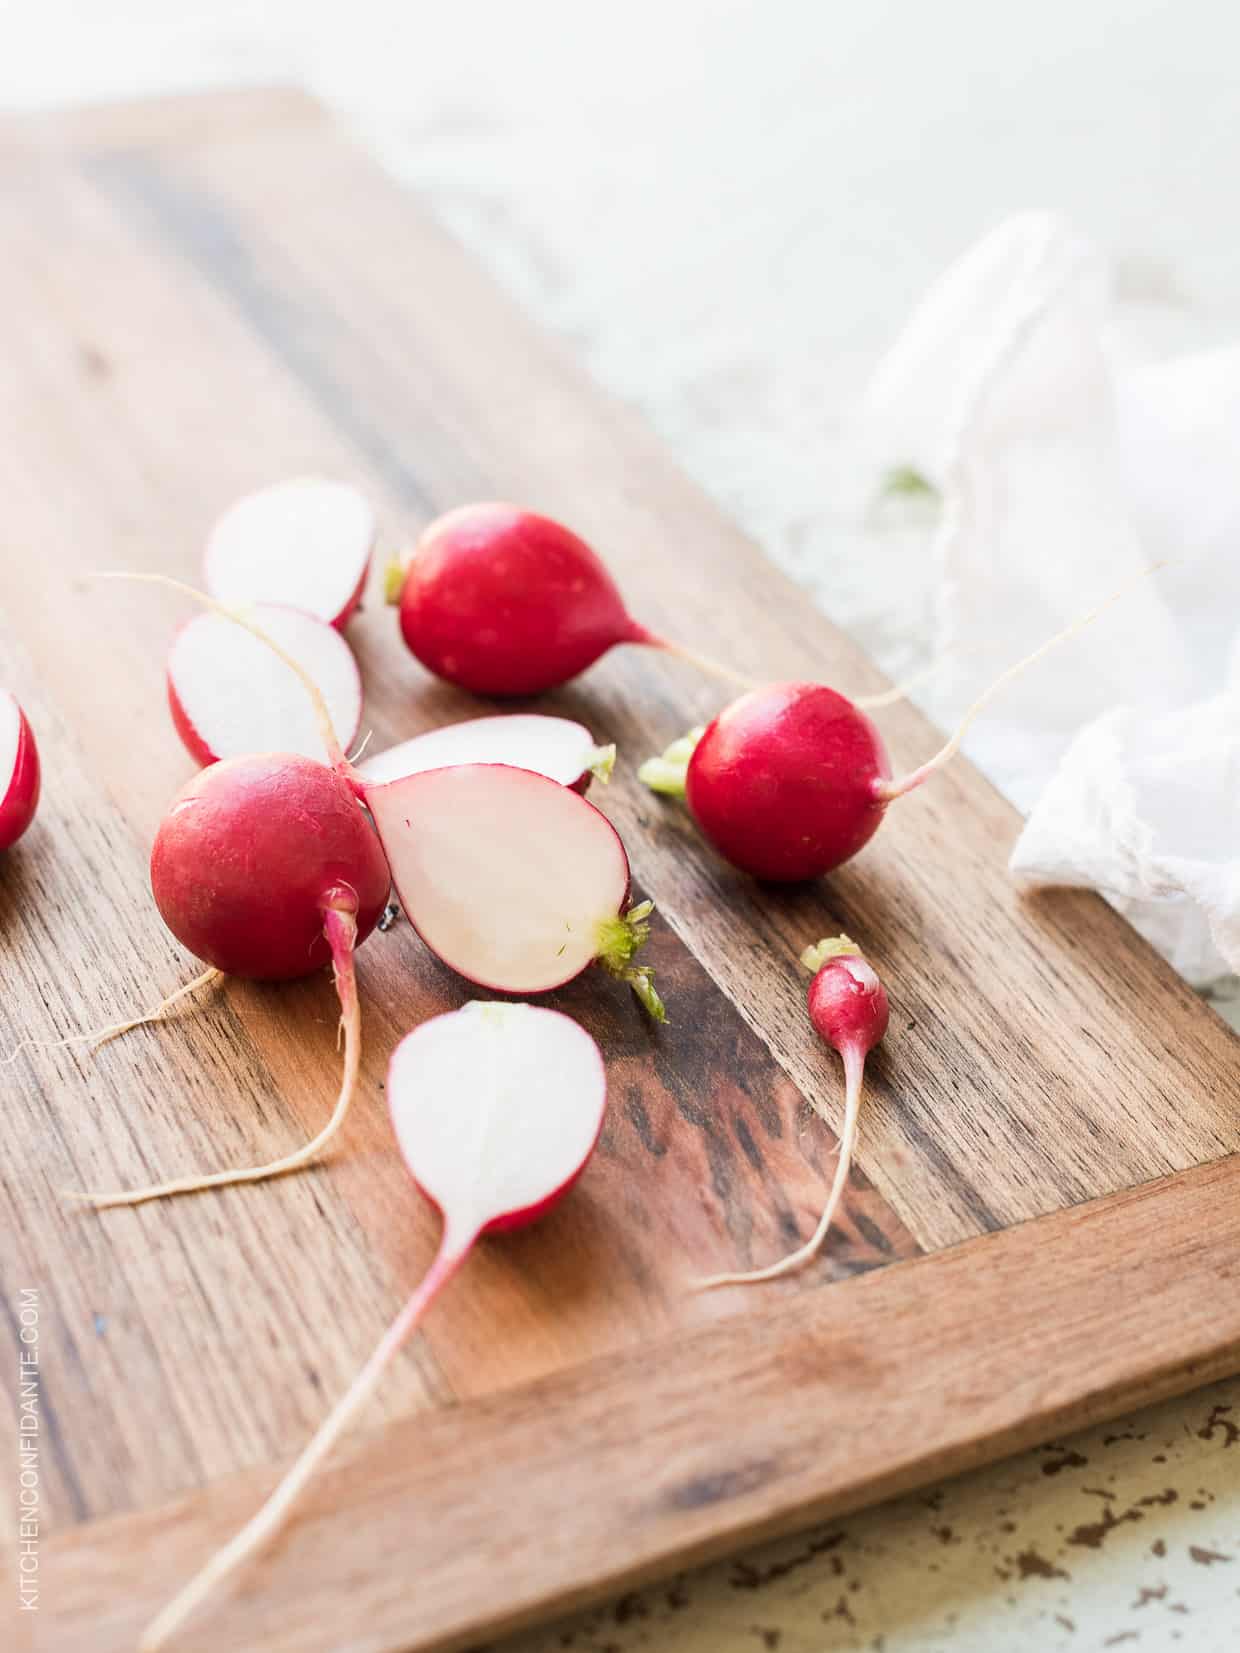 Halved radishes on a wooden surface.